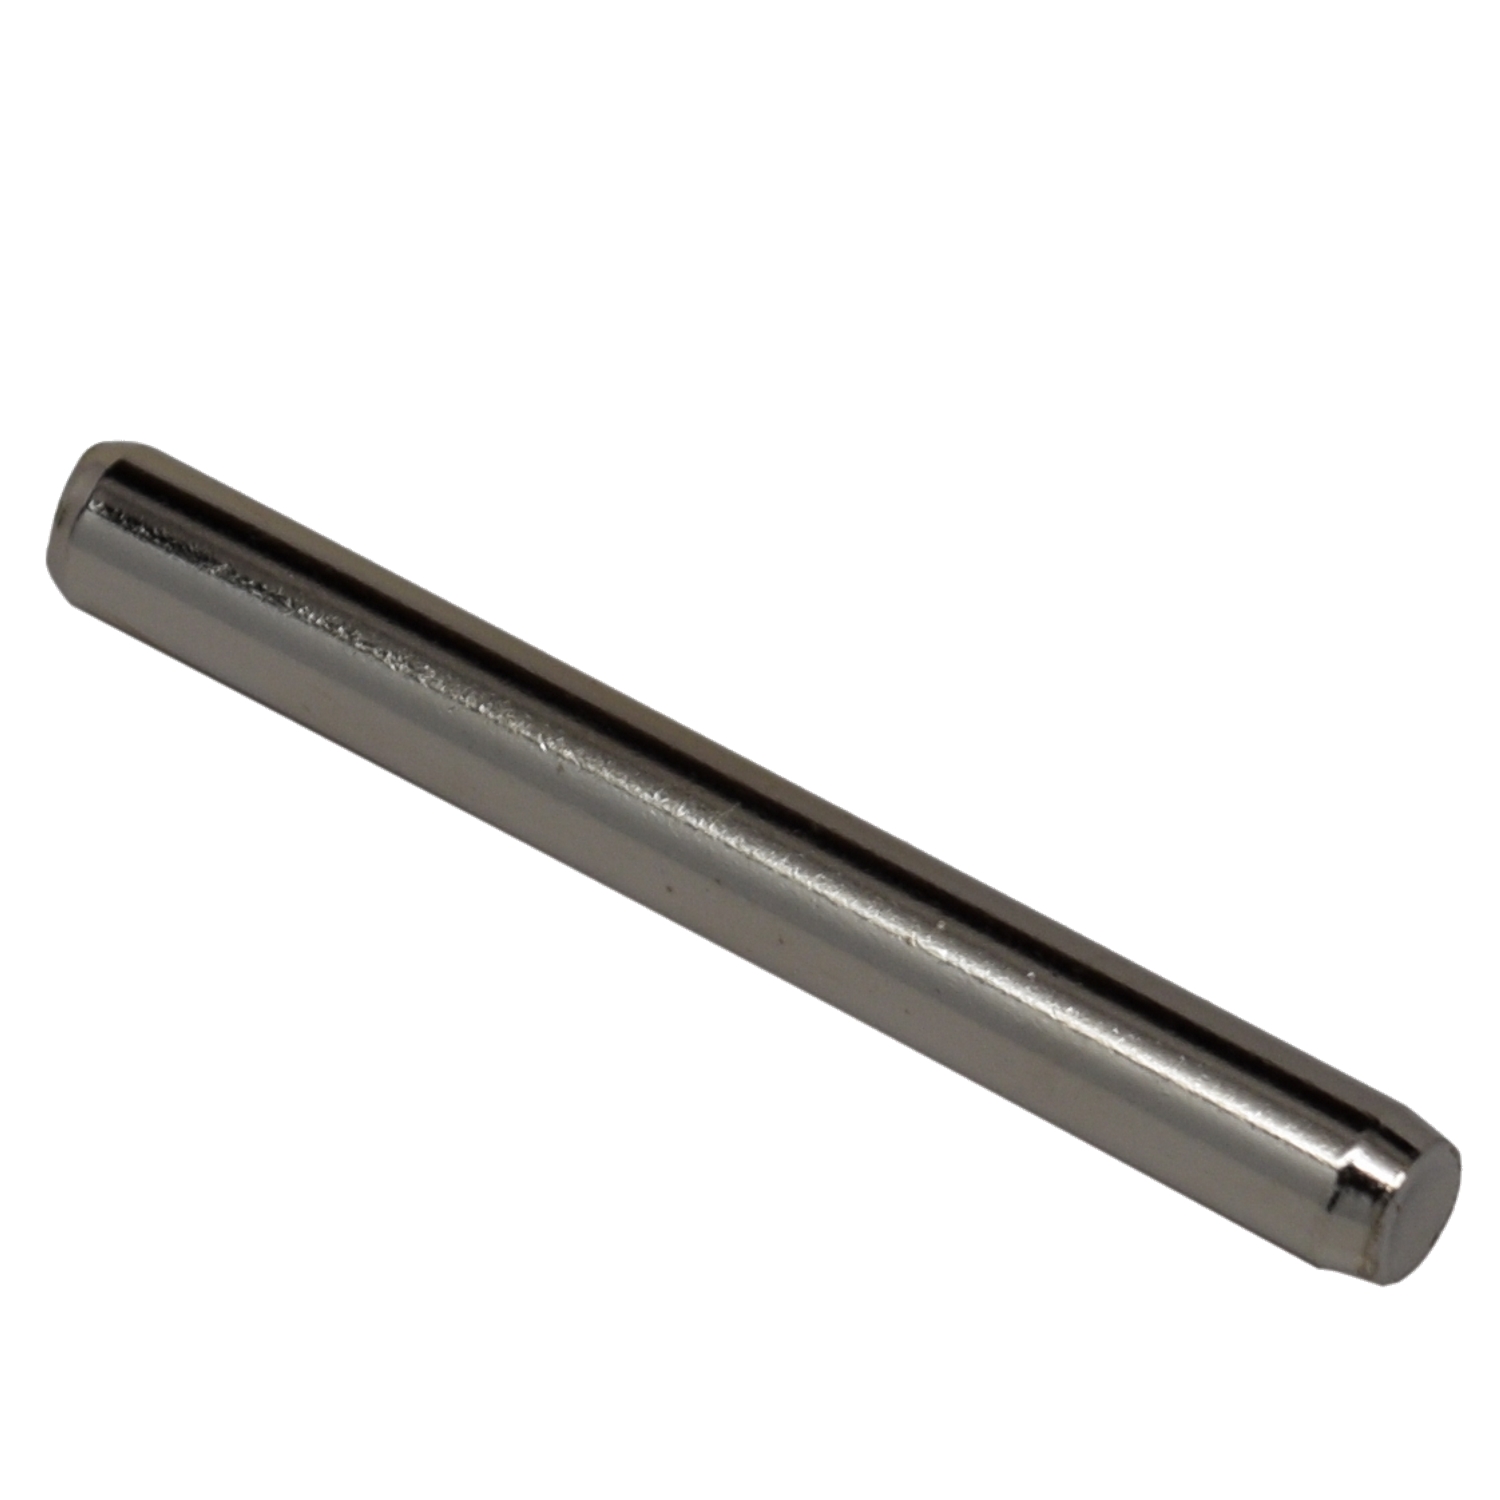 5mm Polished Nickel Long Cylinder Shelf Support Pegs - 25 Pack